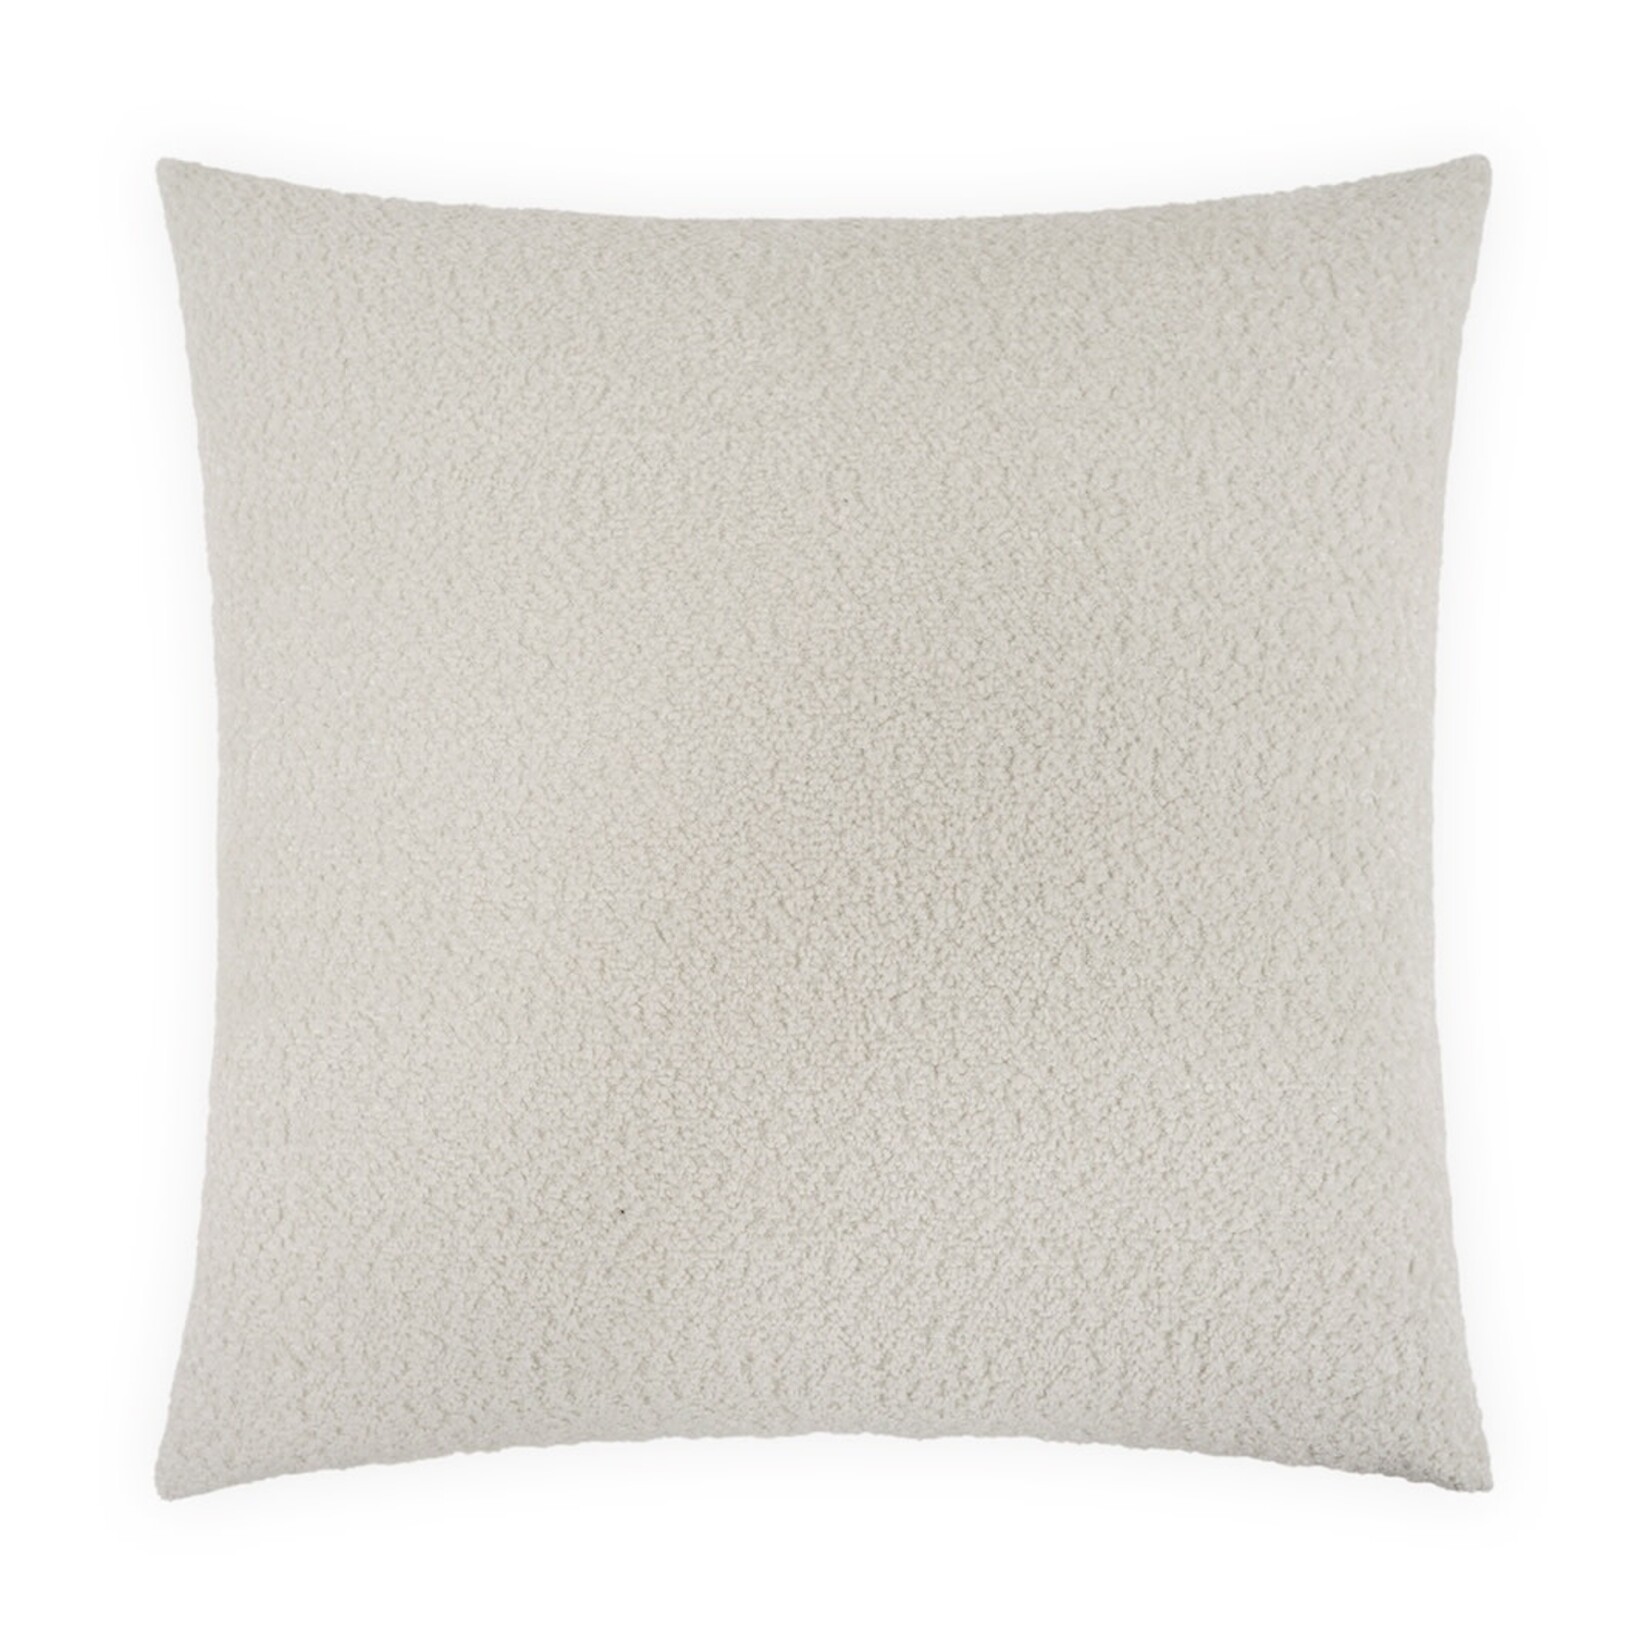 Outside The Box 24x24 Snuggle Square Feather Down Pillow In Ivory